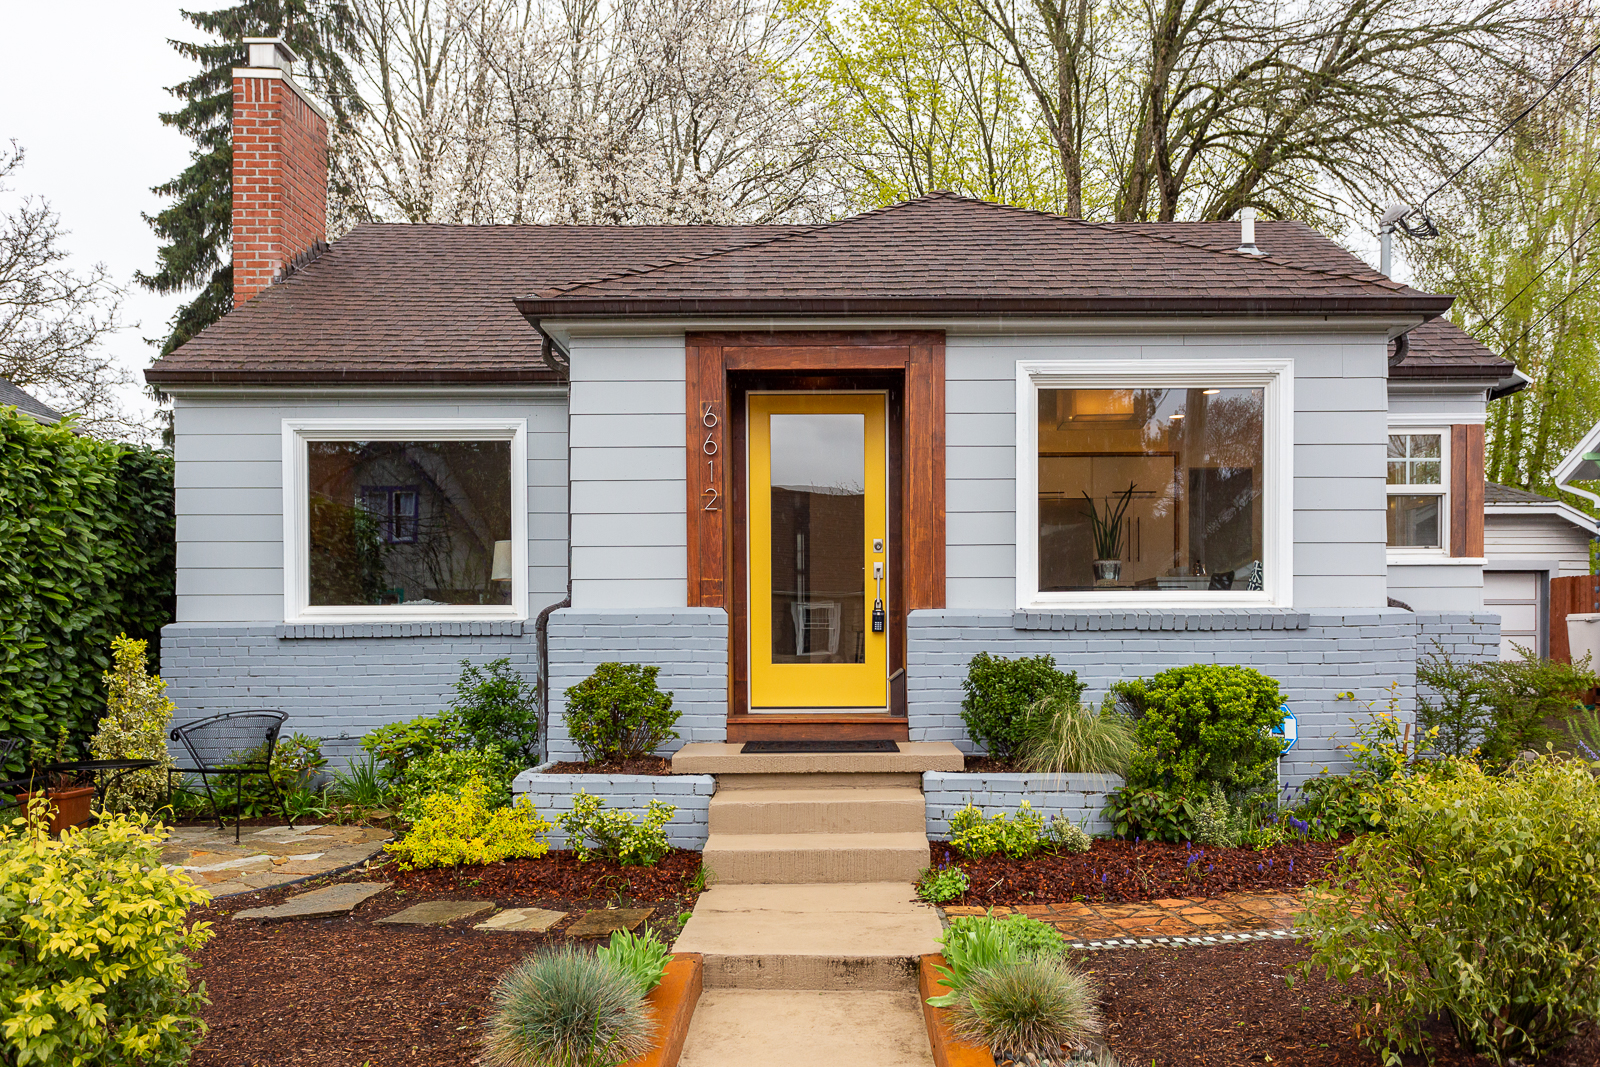 SOLD for $575,000 in Only 6 DOM!! 6612 N Kerby Ave., Portland 97217 - Orig List: $560k